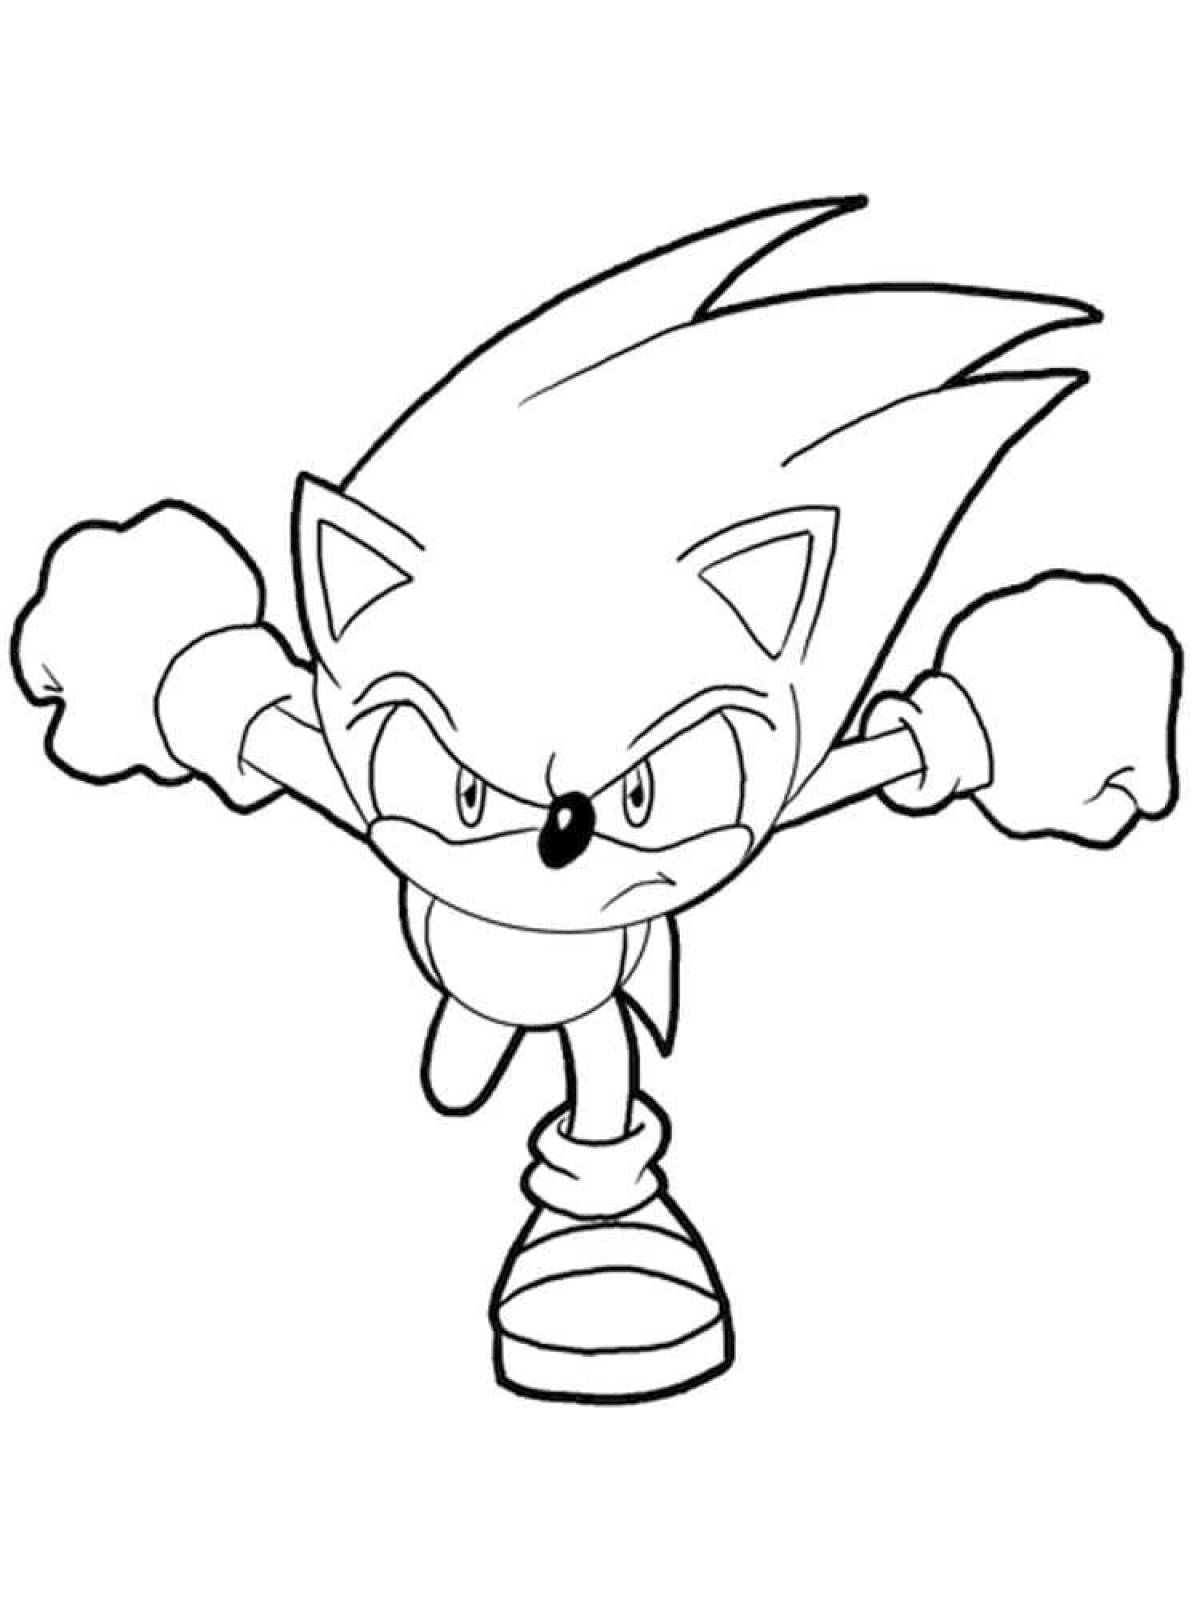 Exciting sonic coloring for boys